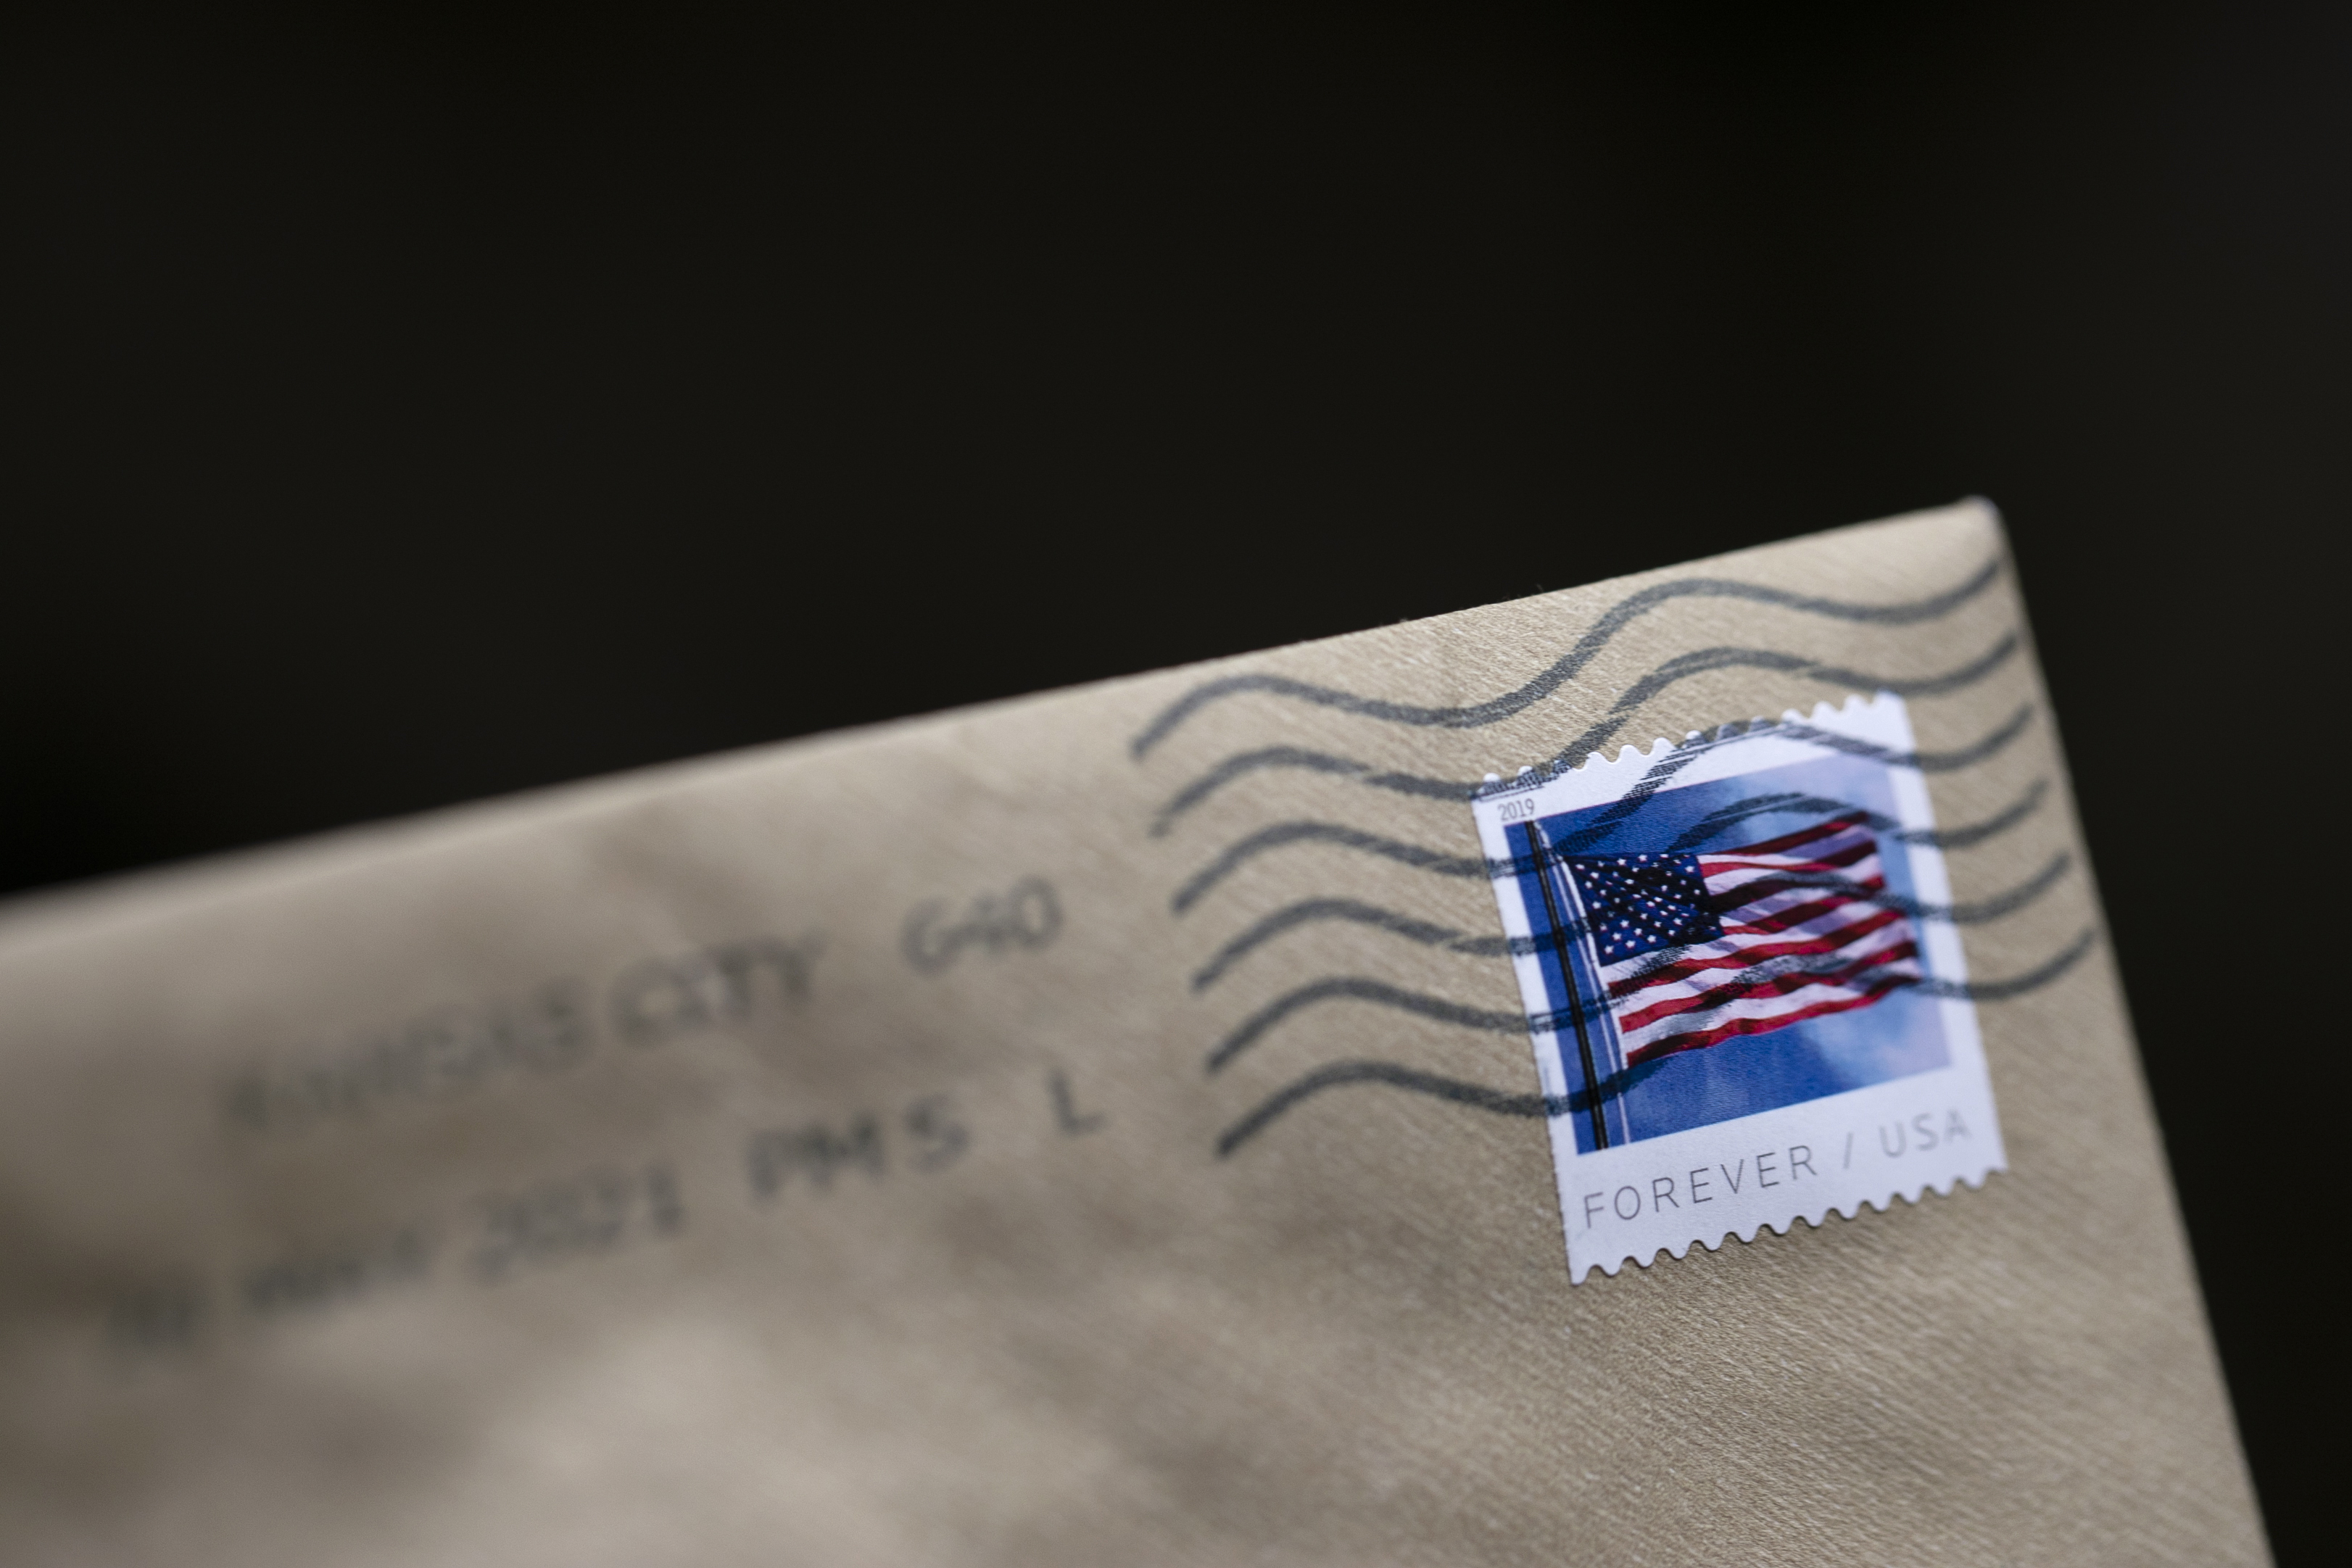 The USPS is set to increase the price of Forever Stamps